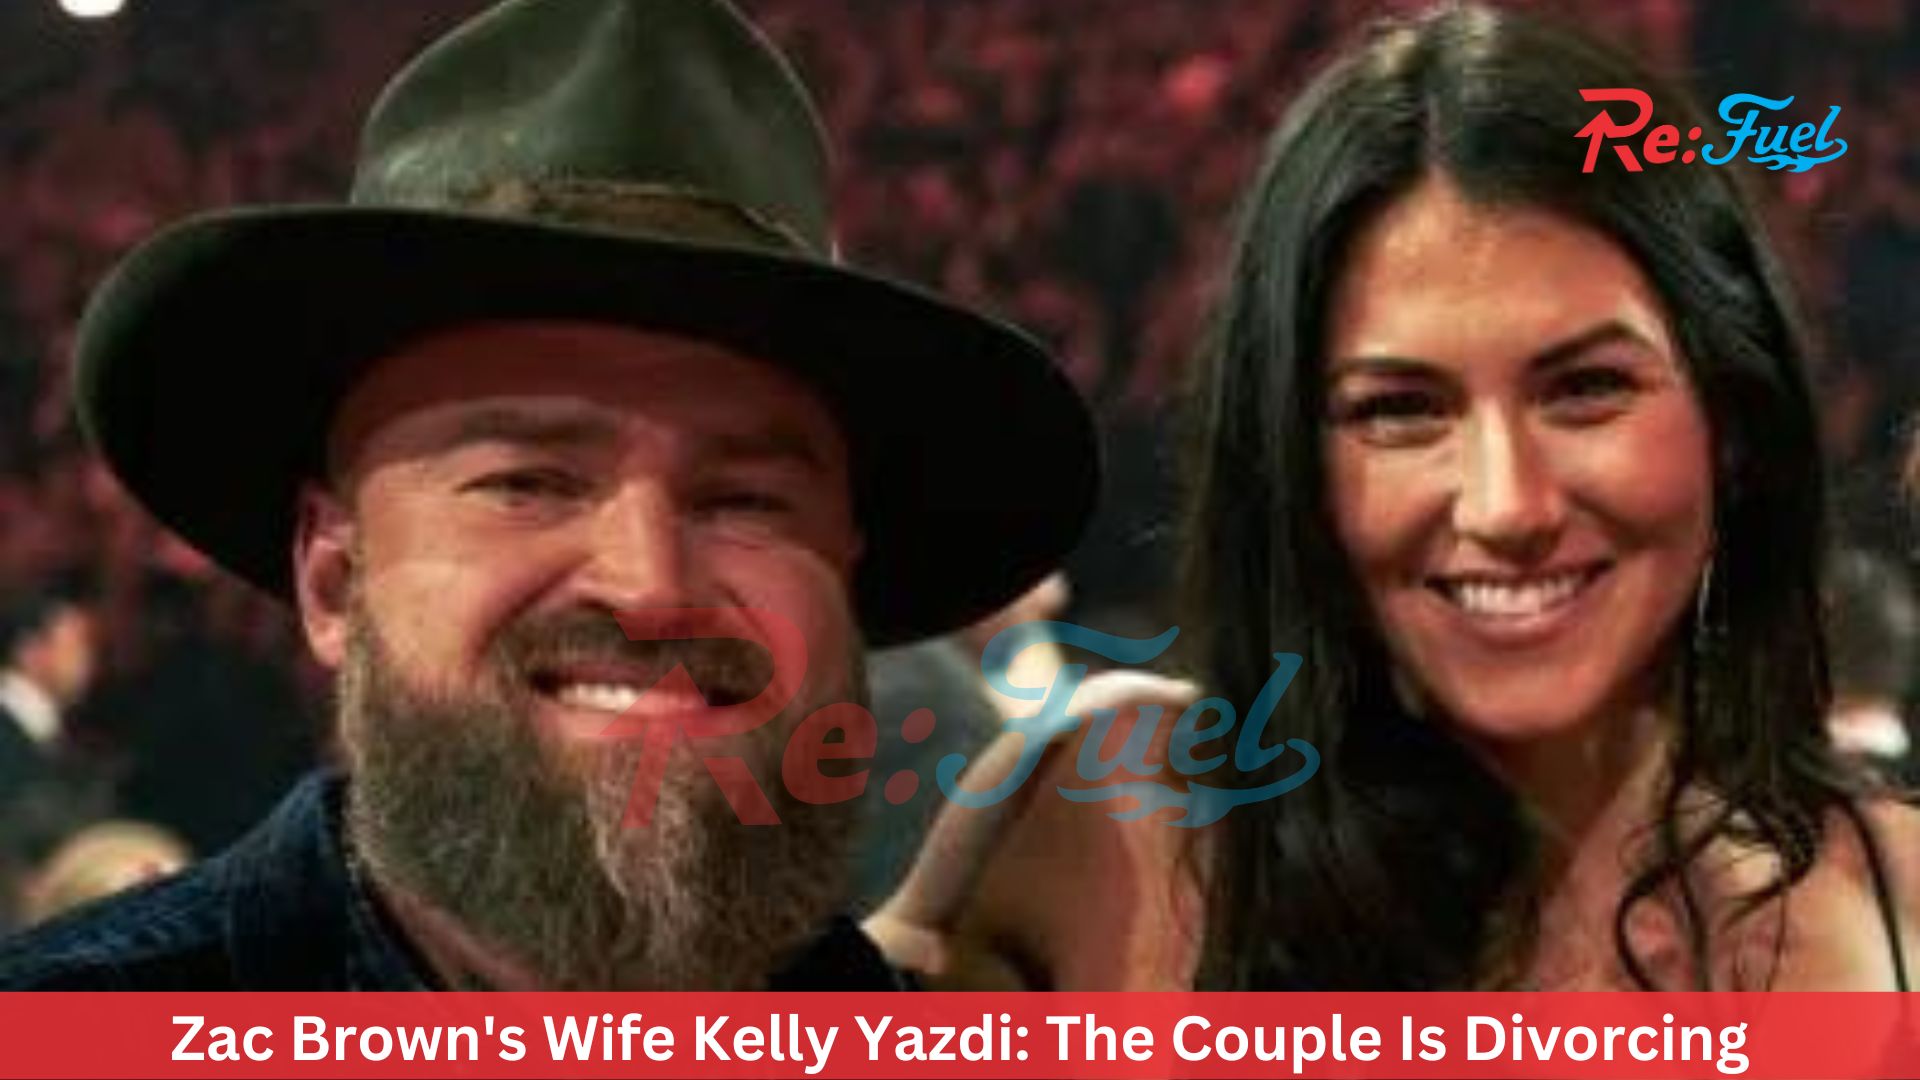 Zac Brown's Wife Kelly Yazdi: The Couple Is Divorcing